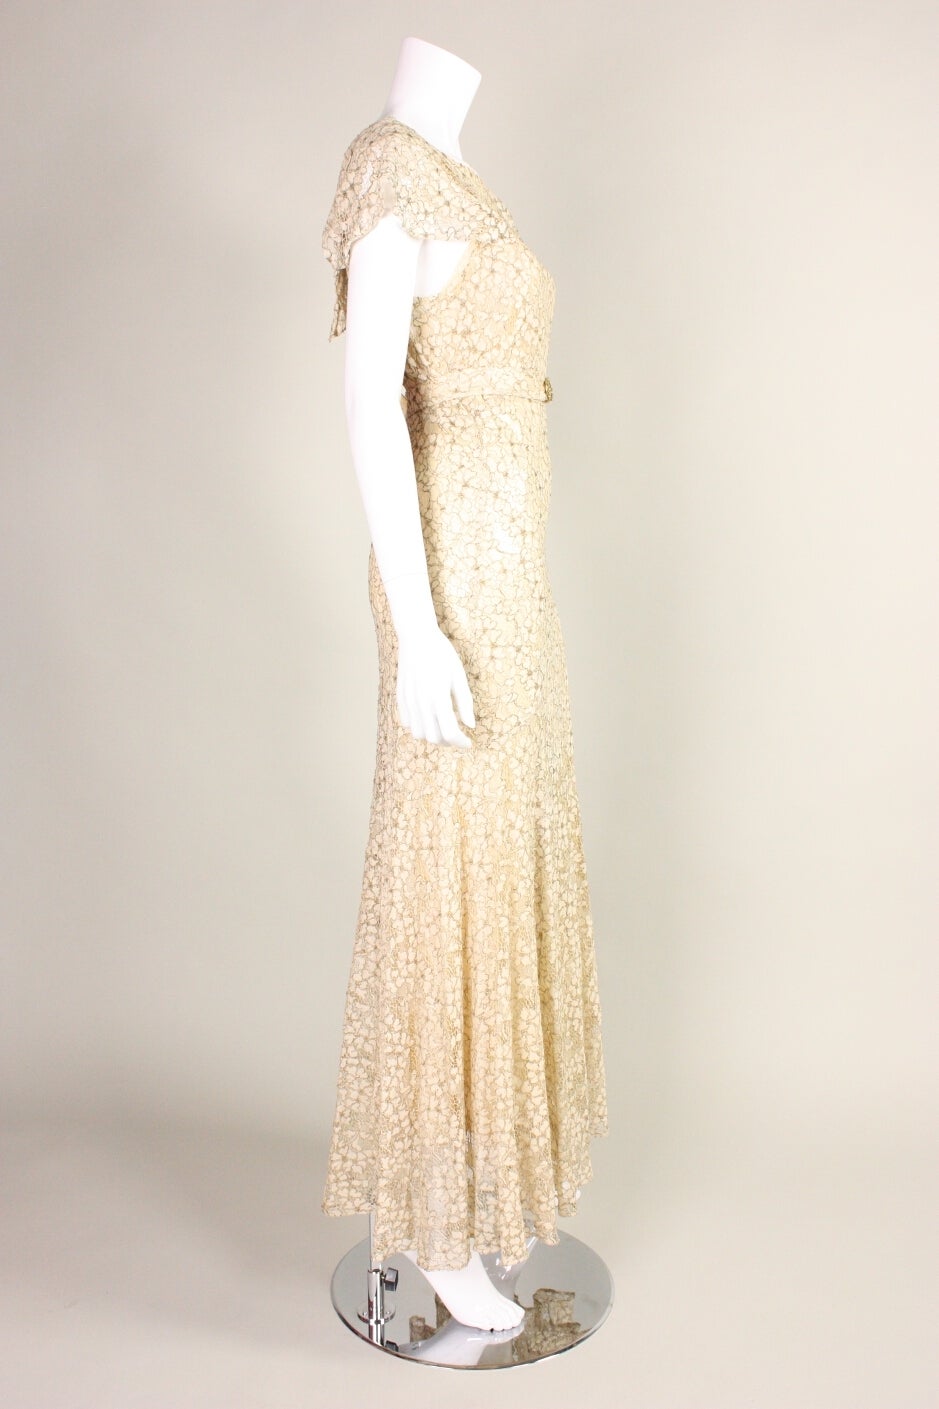 Lamé Lace Ivory Bias-Cut Gown, 1930s  In Excellent Condition For Sale In Los Angeles, CA